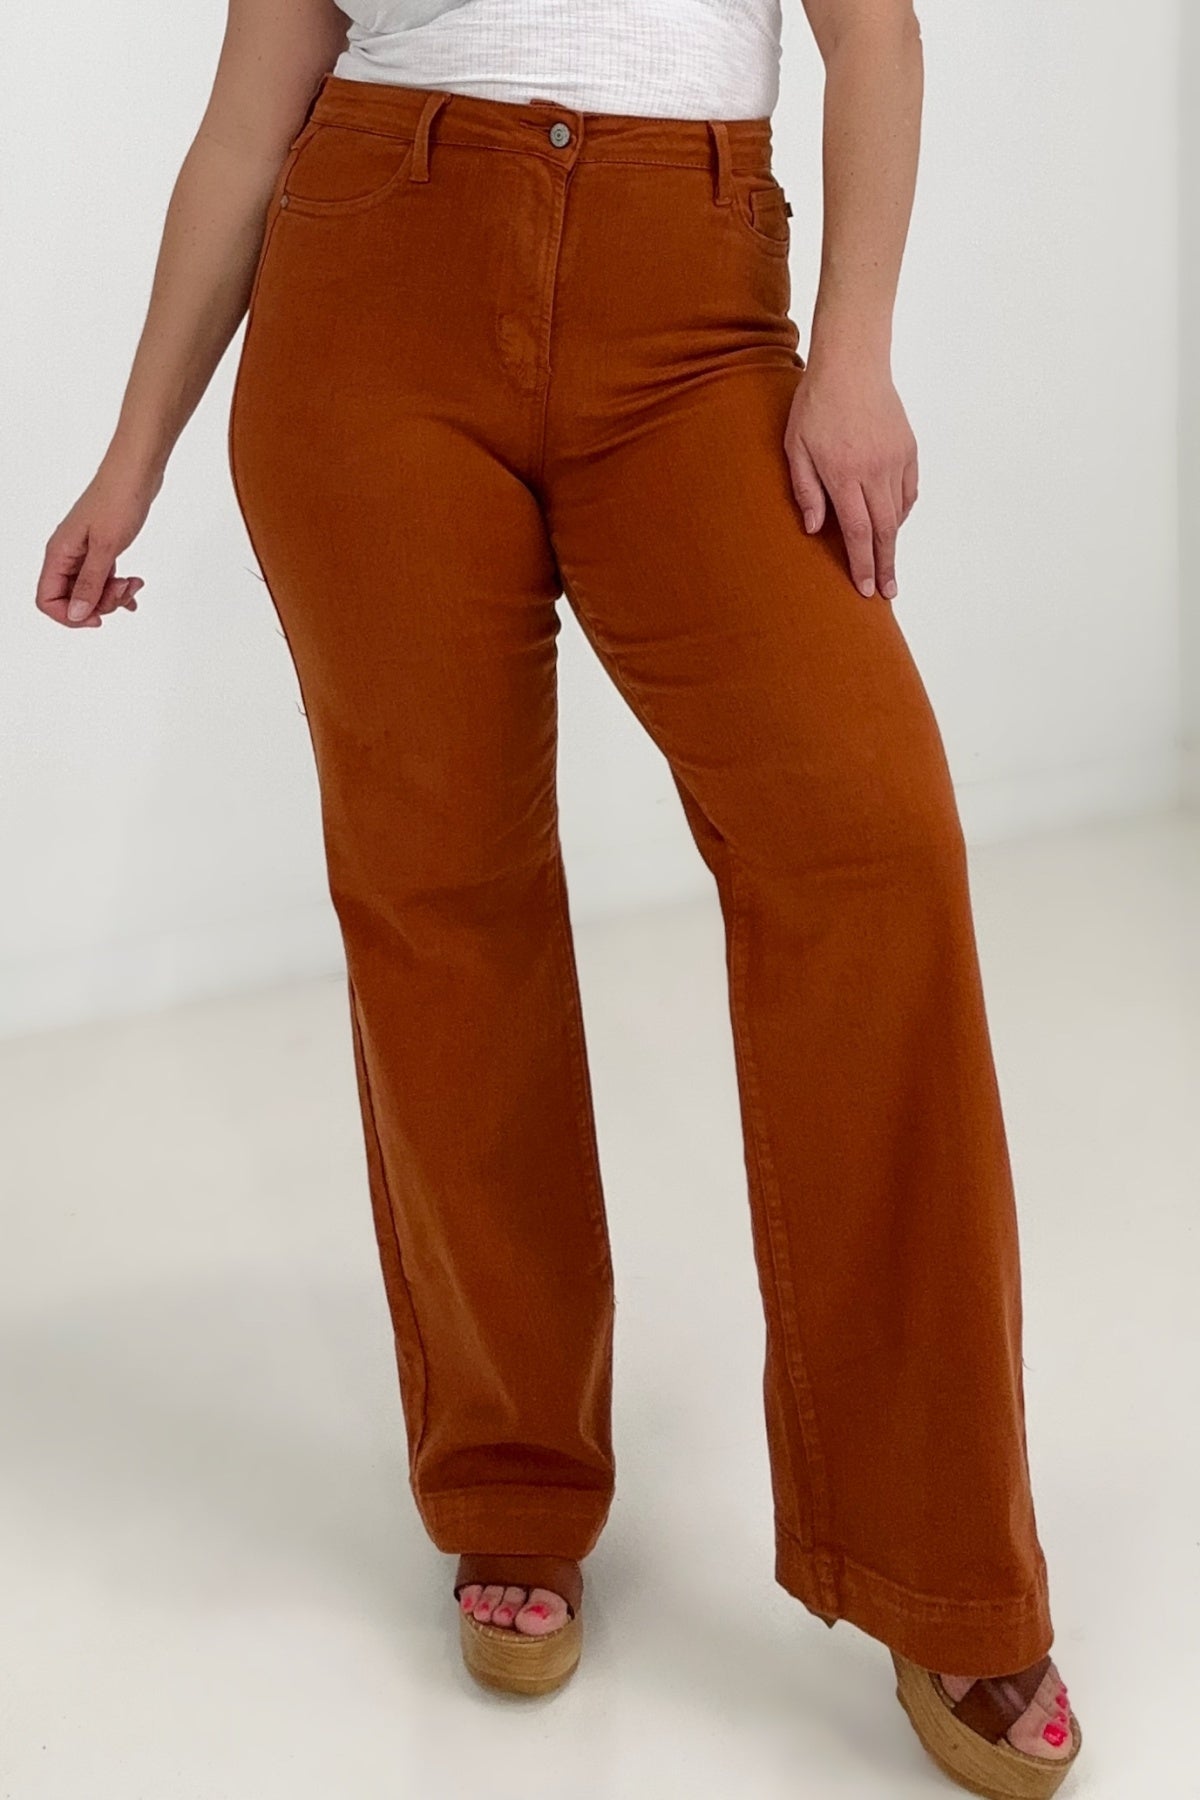 AUB ORANGE Judy Blue High Waist Garment Dyed Wide Leg Jeans - Ships from The US - women's jeans at TFC&H Co.